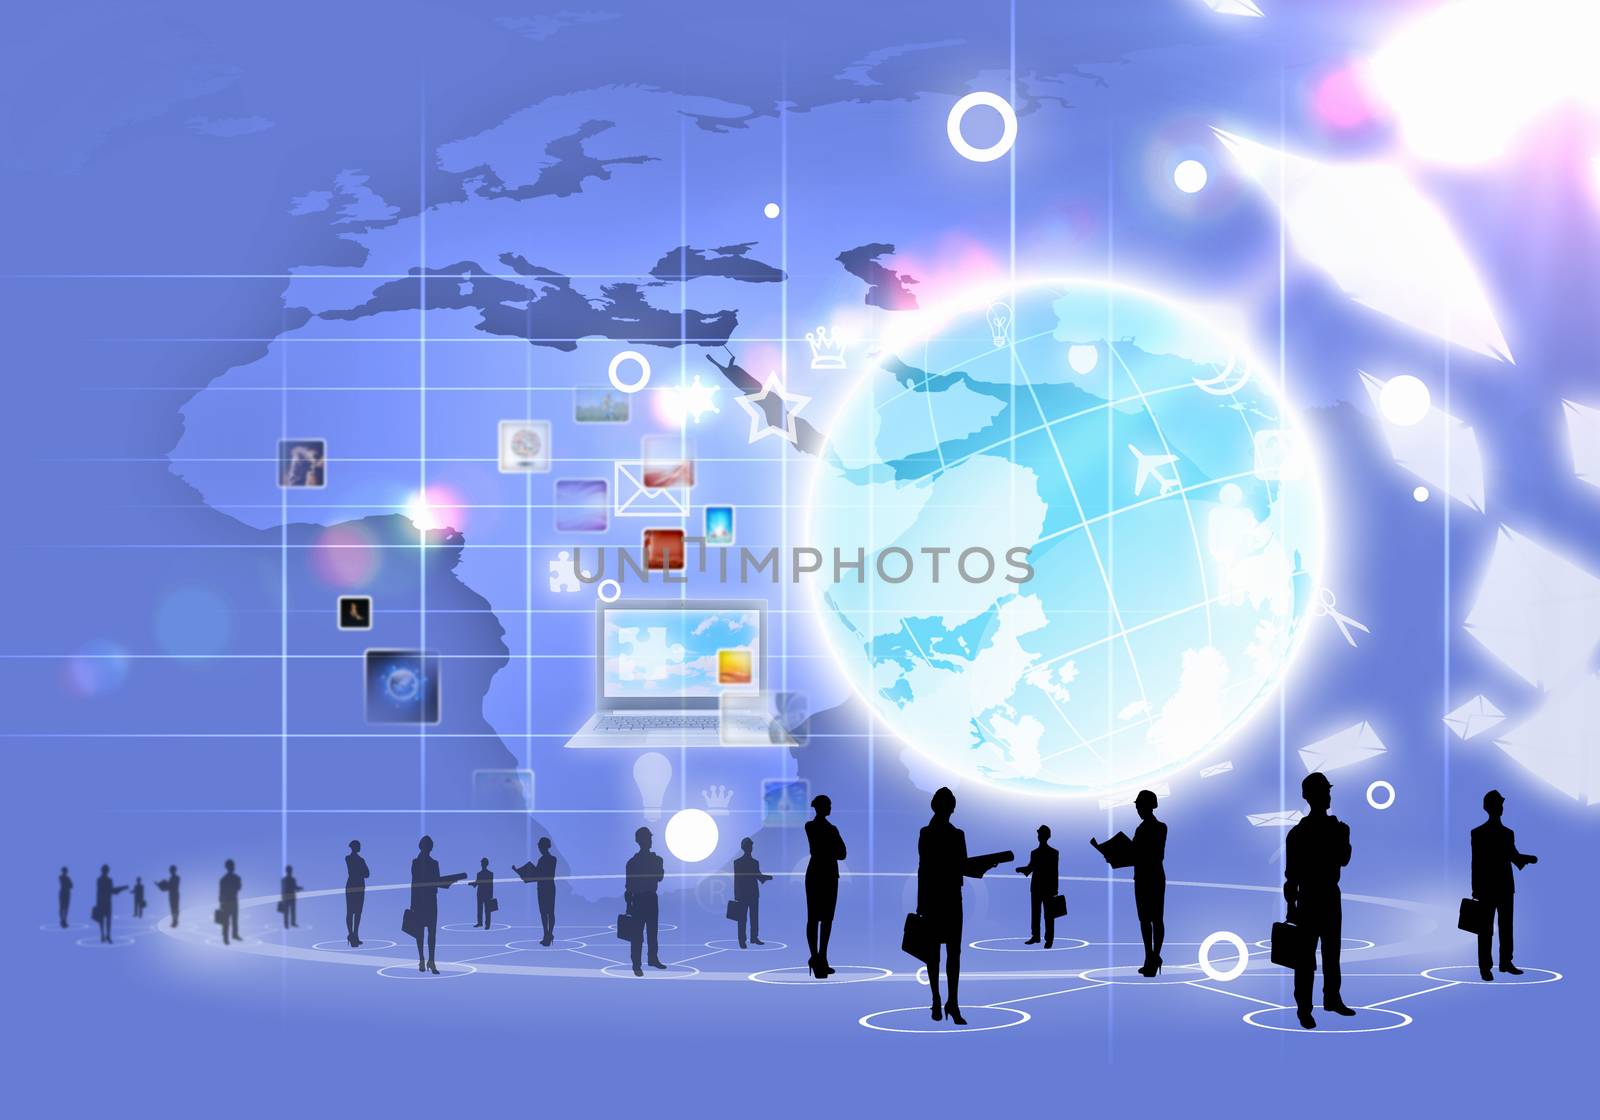 Business people silhouettes against blue media background with icons